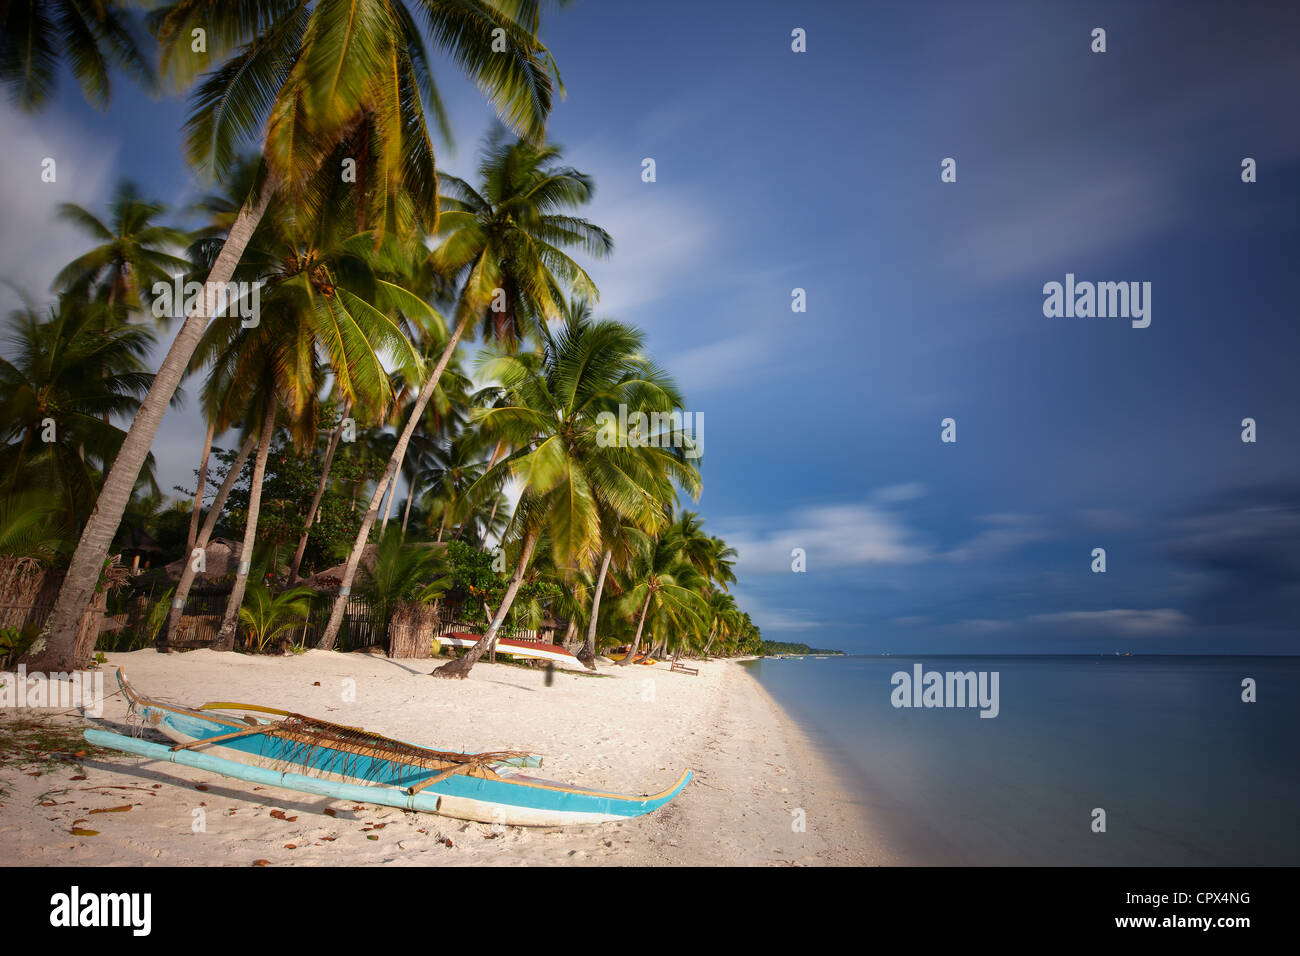 palm trees swaying in the wind, San Juan Beach, Siquijor, The Visayas, Philippines Stock Photo